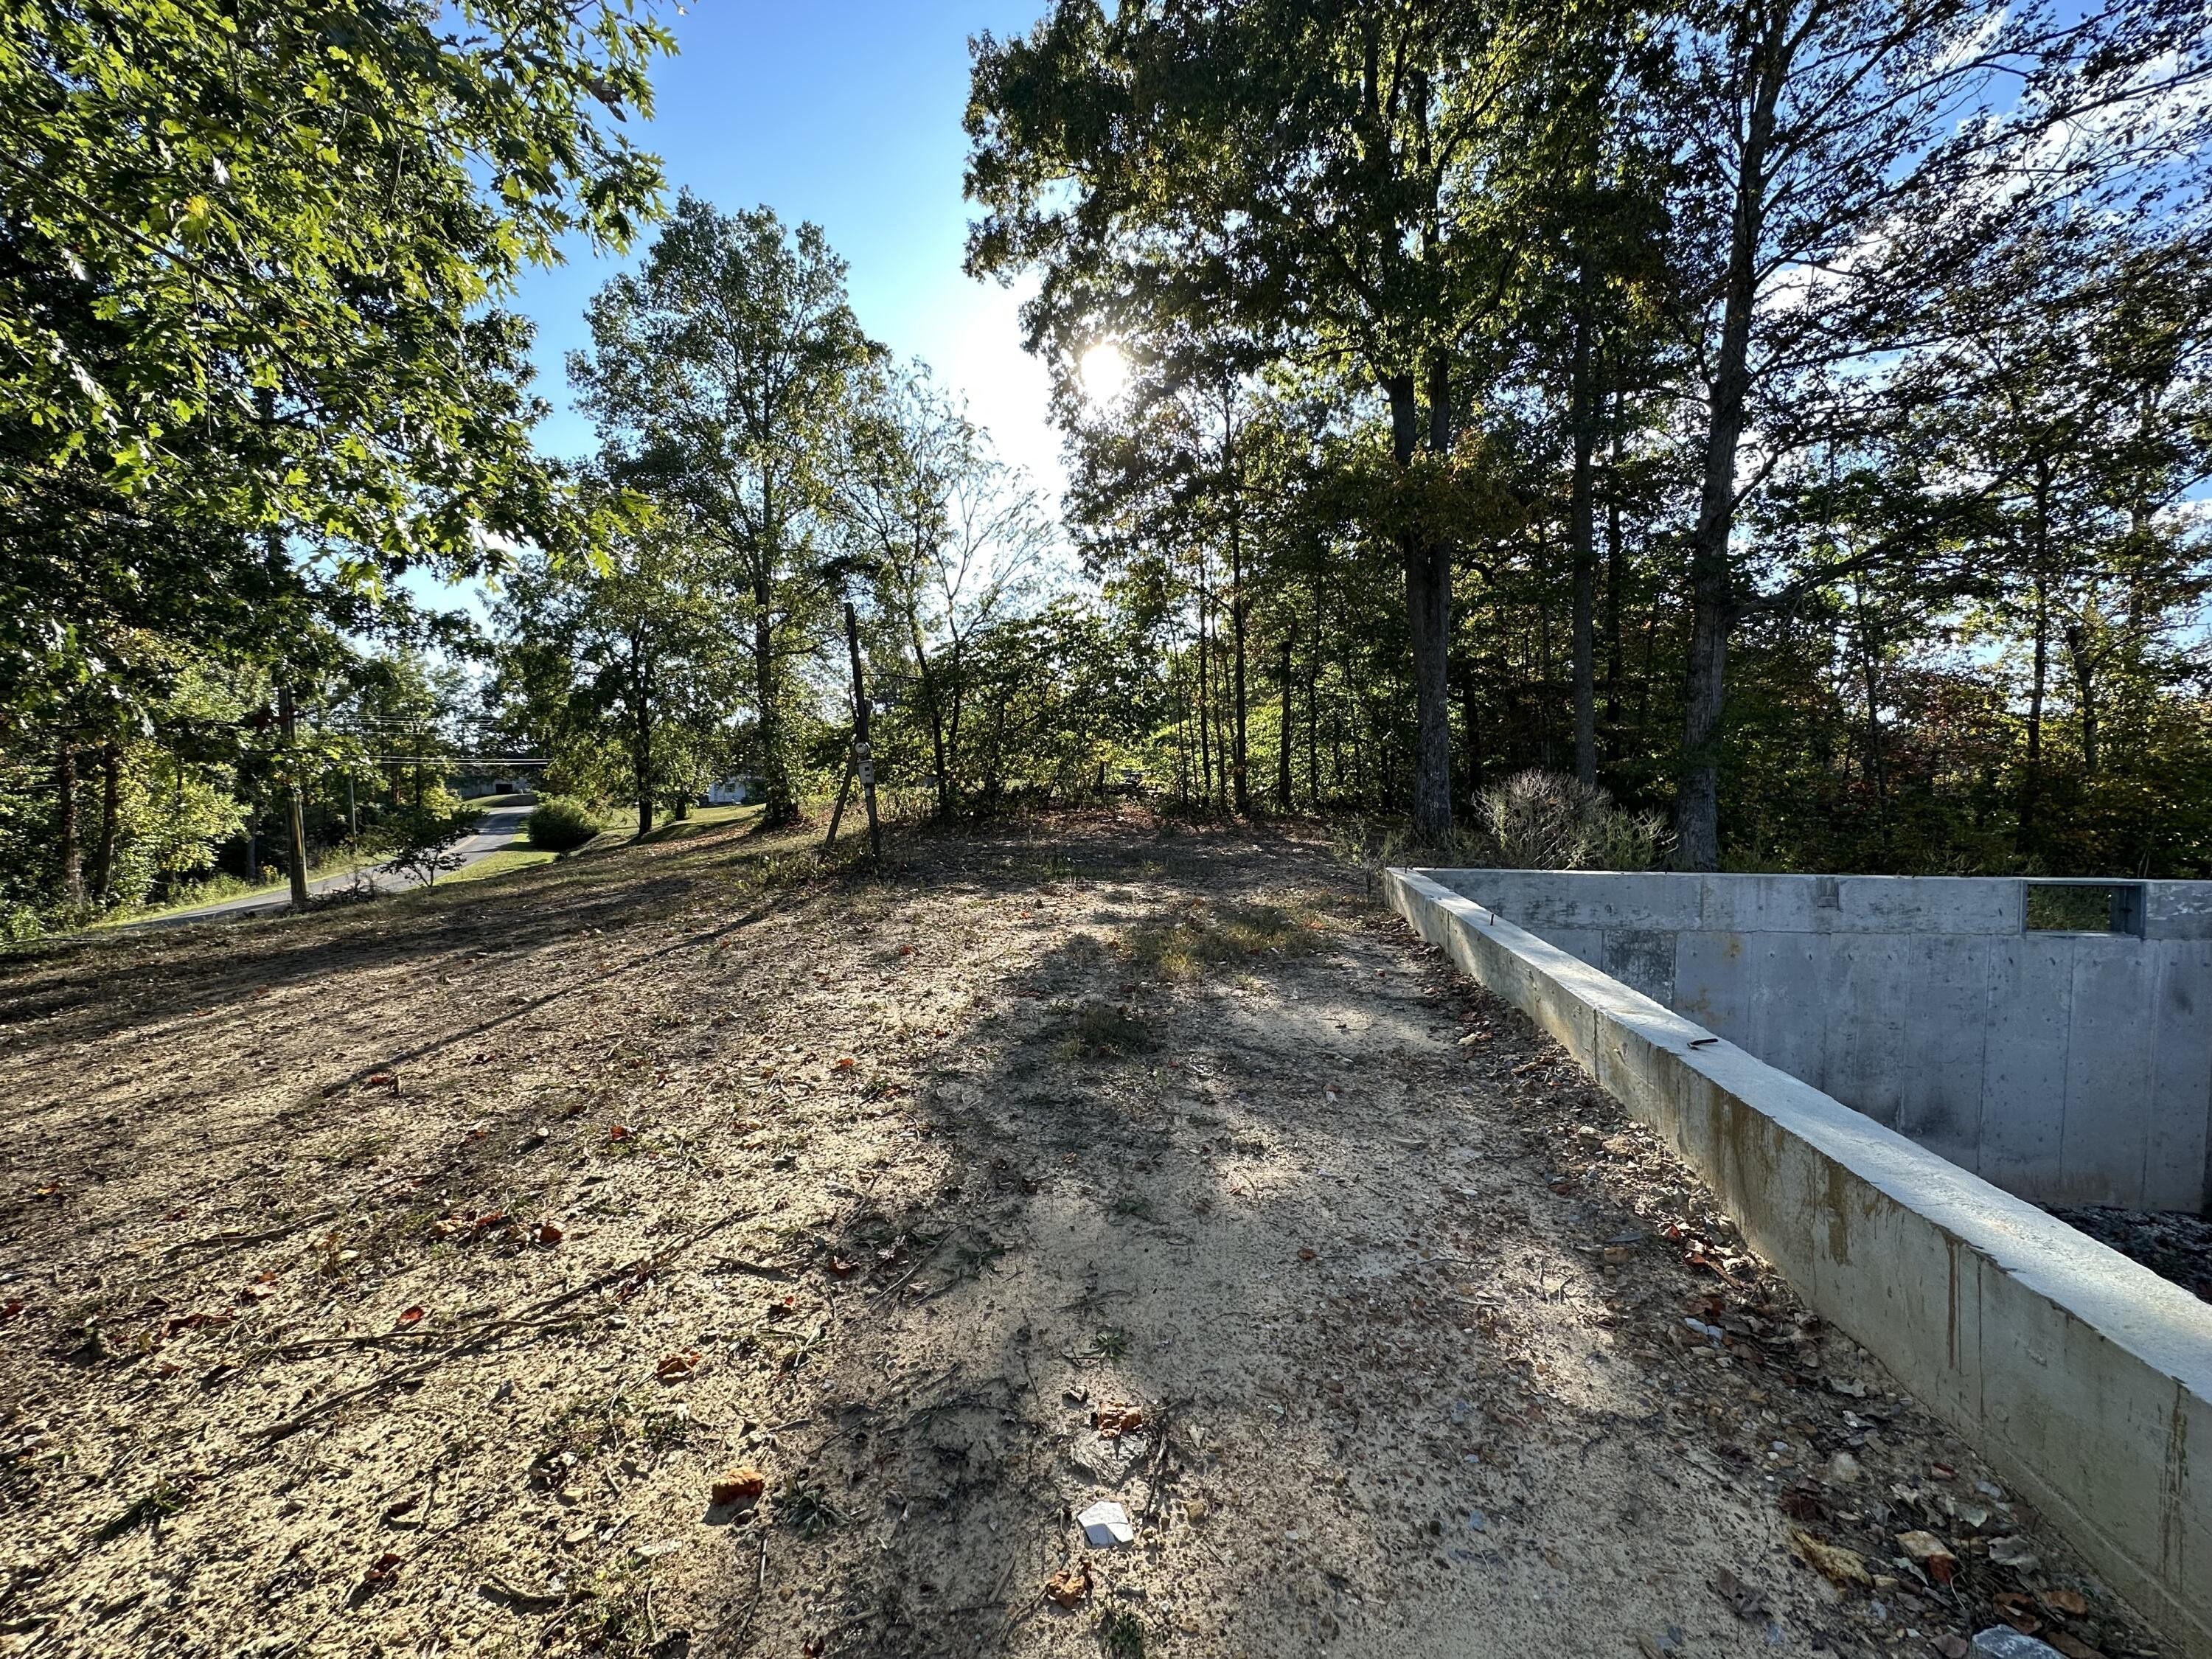 2. 284 Roberts Bend Road - Tract 1 Road